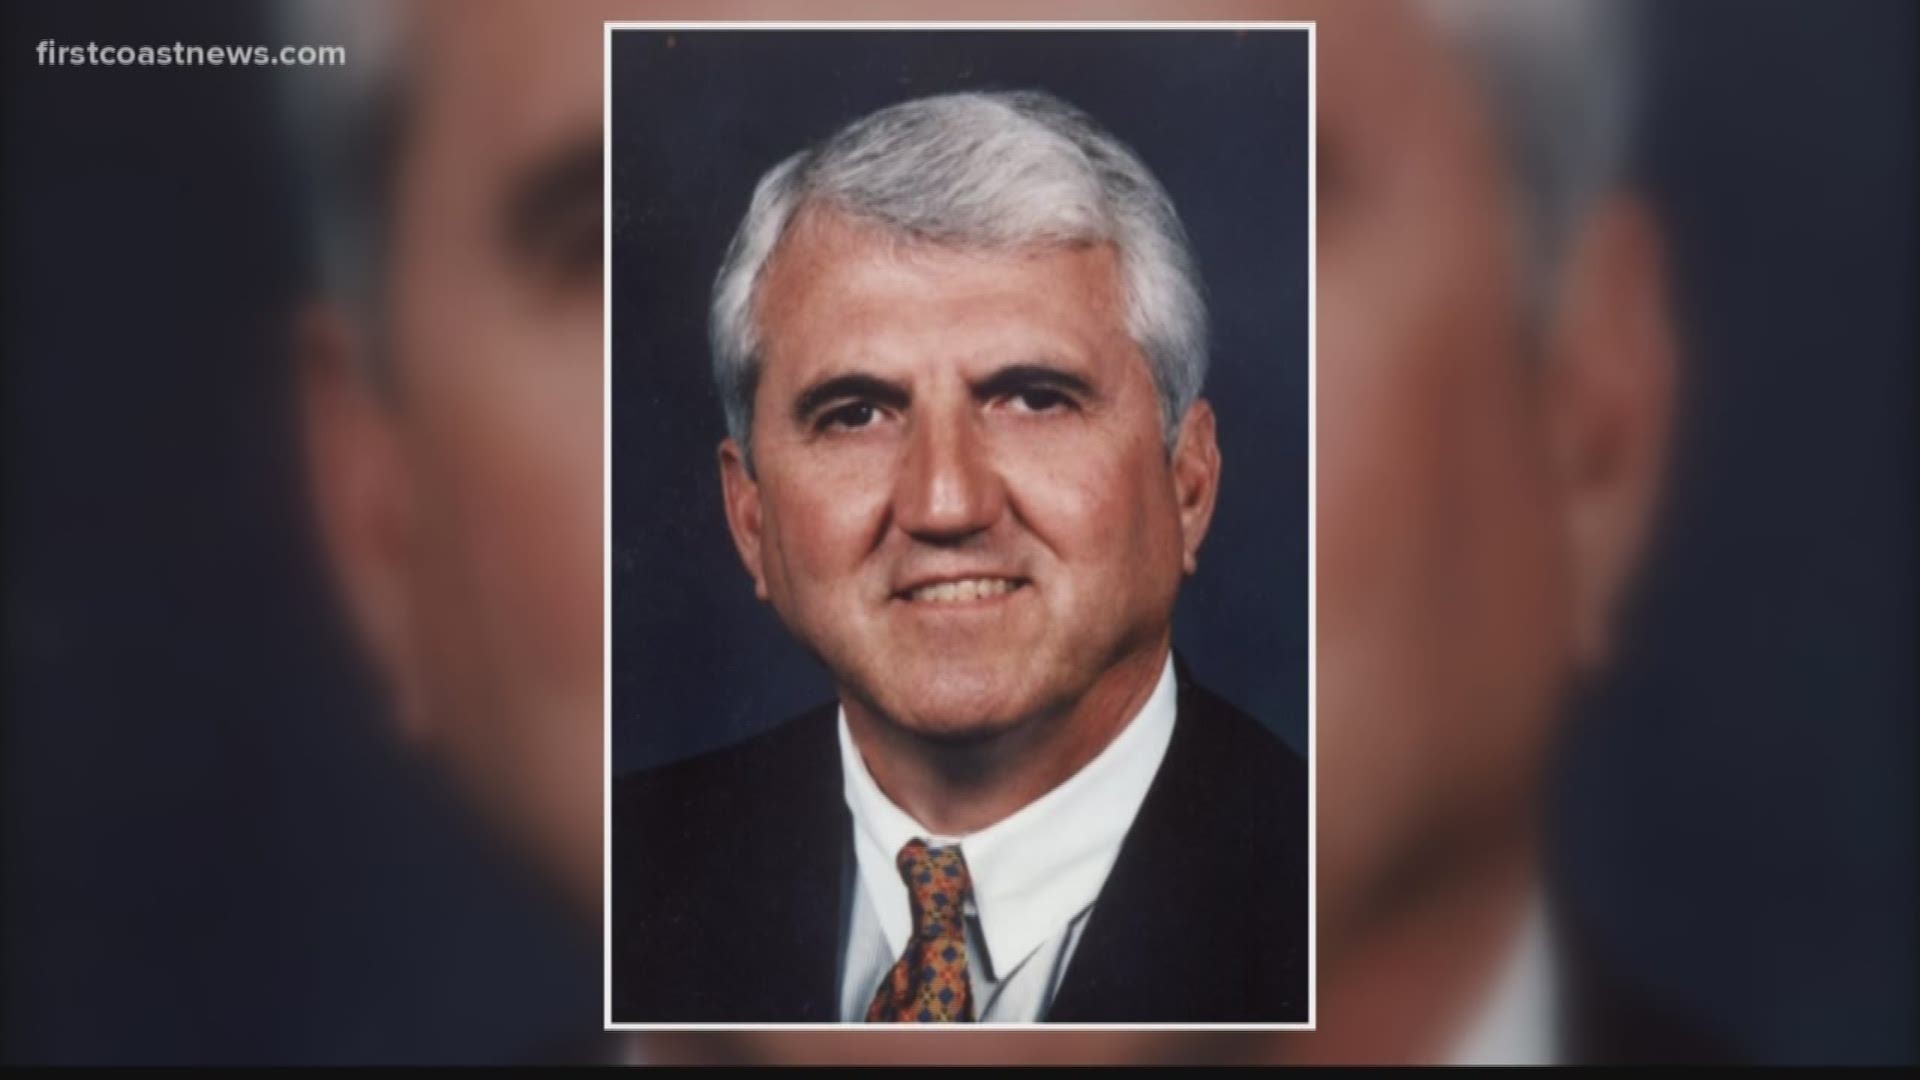 Alvin “Pete” Carpenter, who rose from railroad brakeman to the president of CSX Transportation, died Tuesday. He was 77 and had been suffering from cancer.